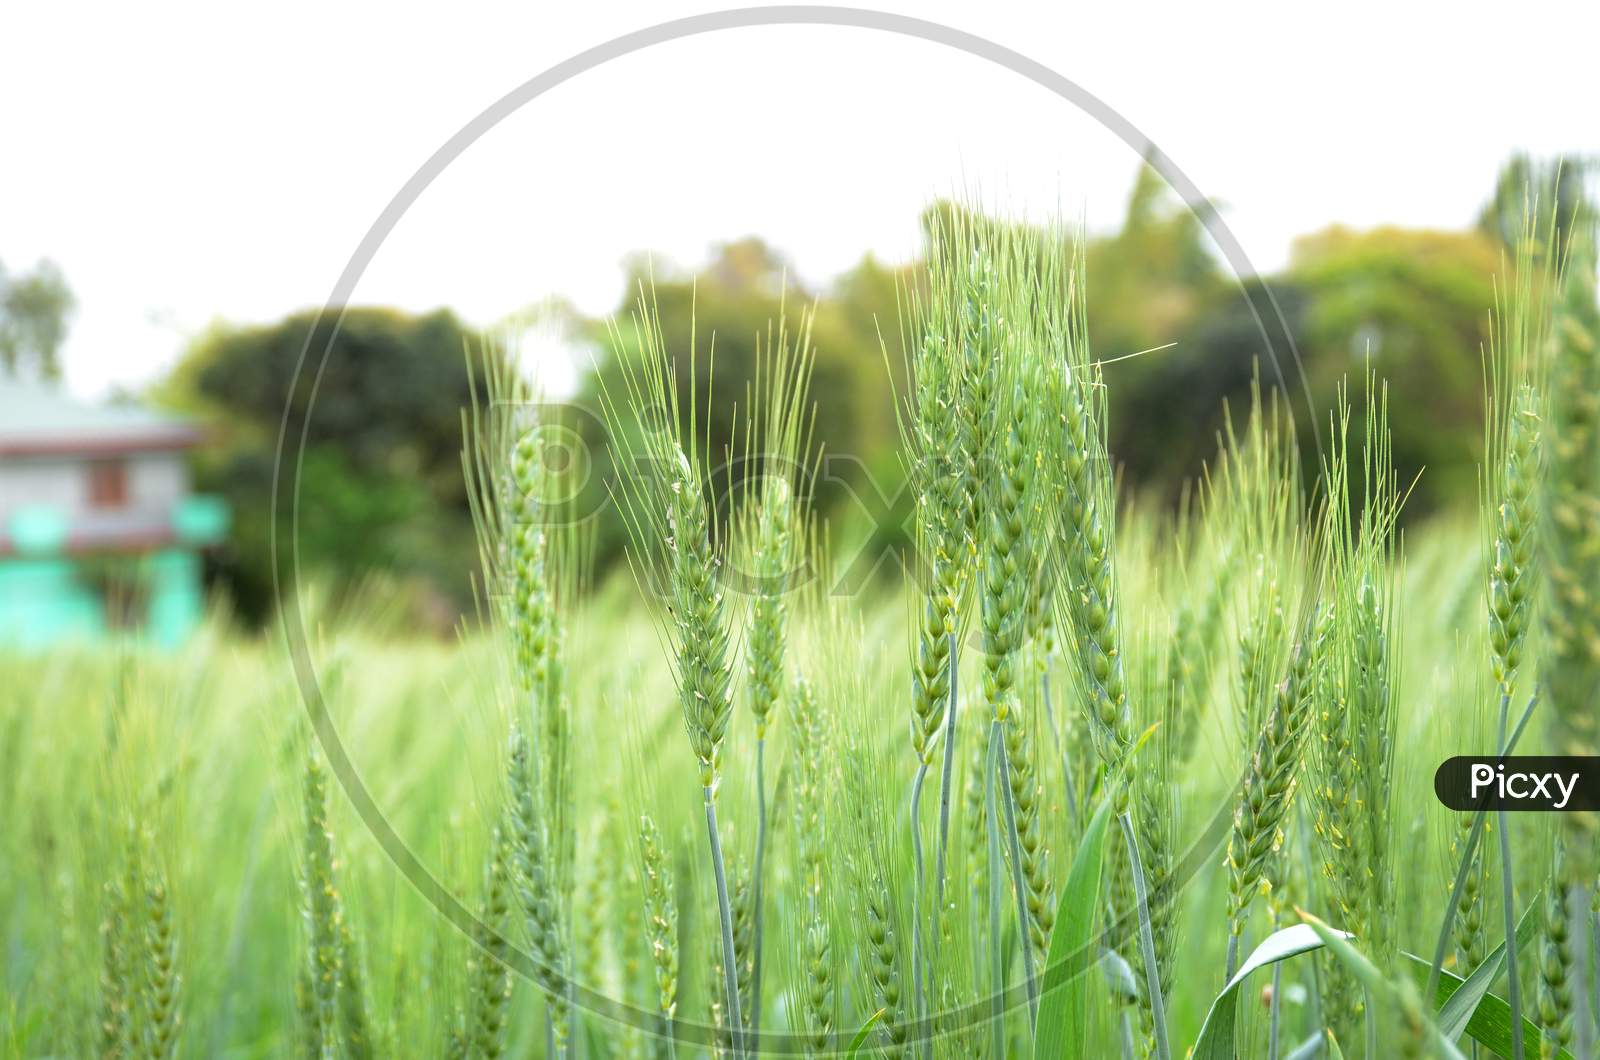 Bunch The Ripe Green Wheat Stitch Growing In The Farm.